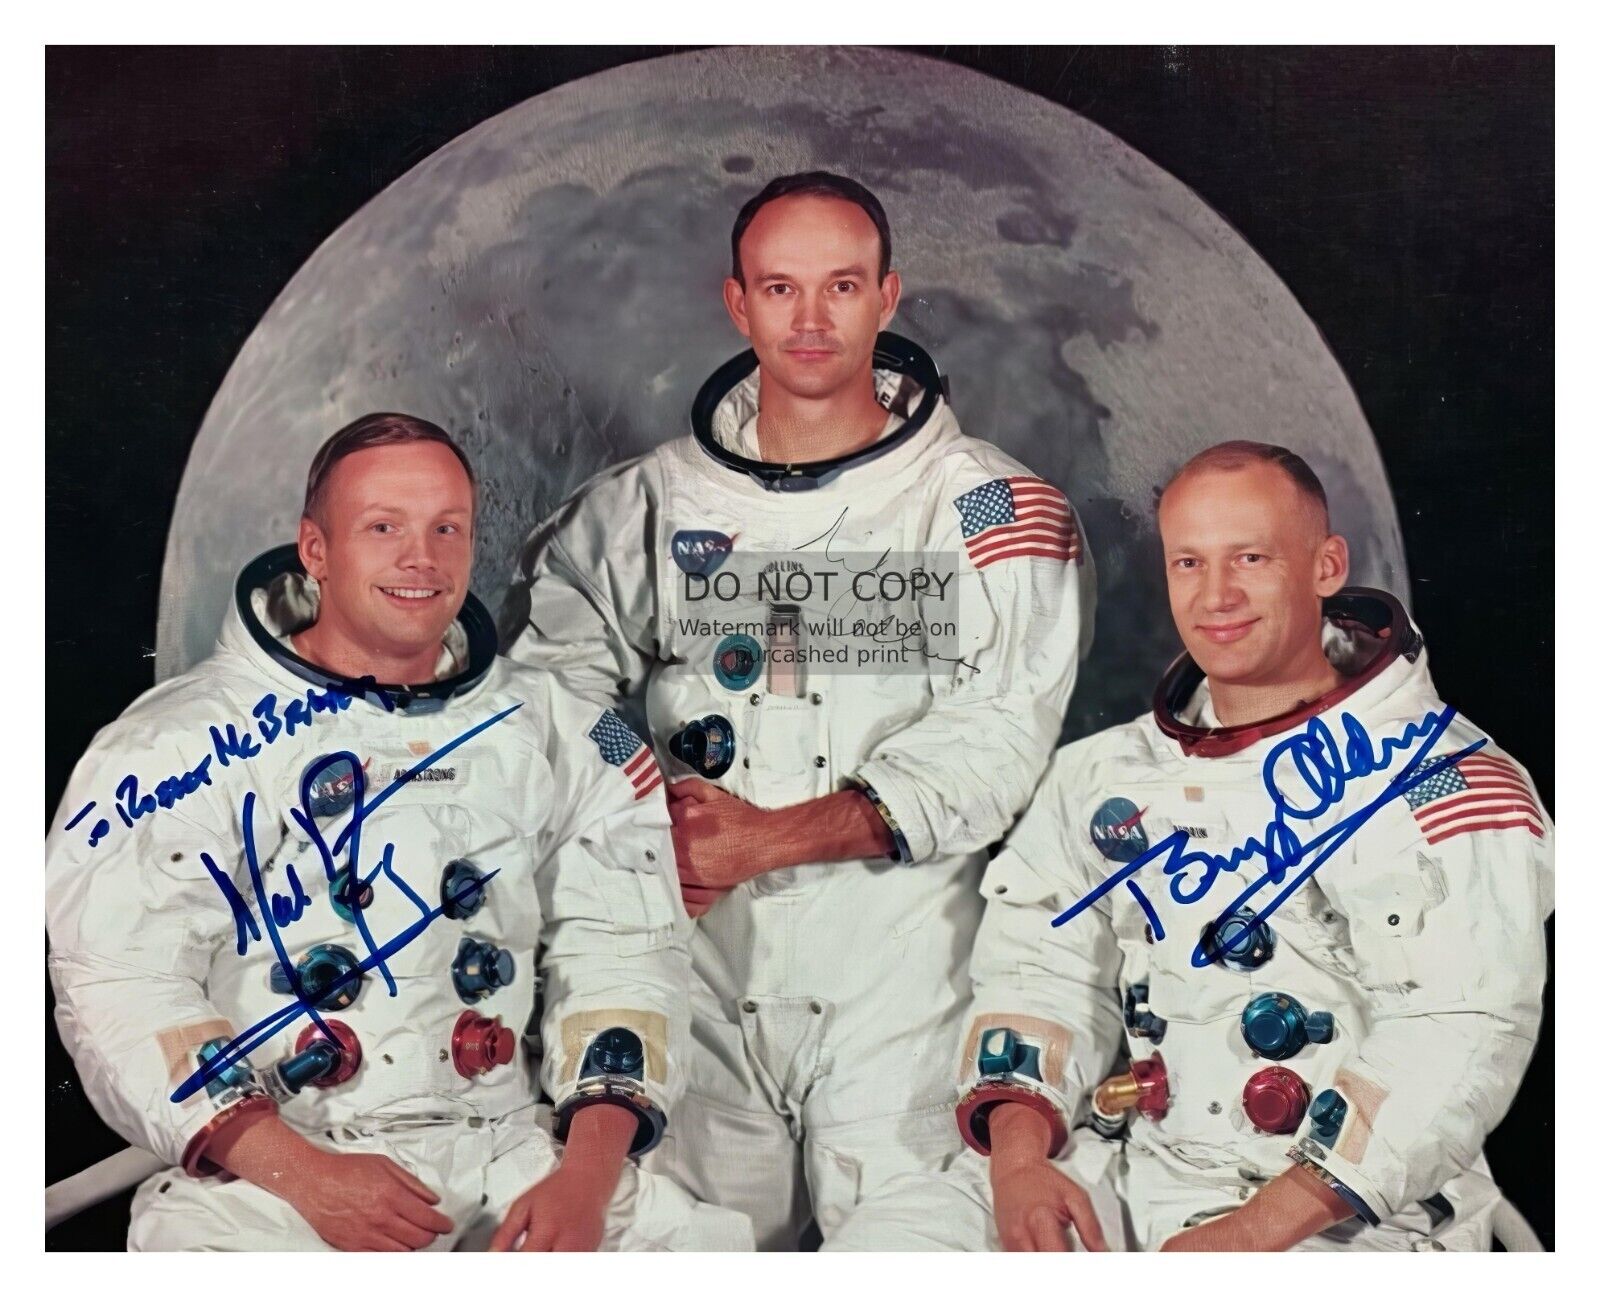 NEIL ARMSTRONG BUZZ ALDRIN MICHEAL COLLINS AUTOGRAPHED 8X10 PHOTOGRAPH REPRINT